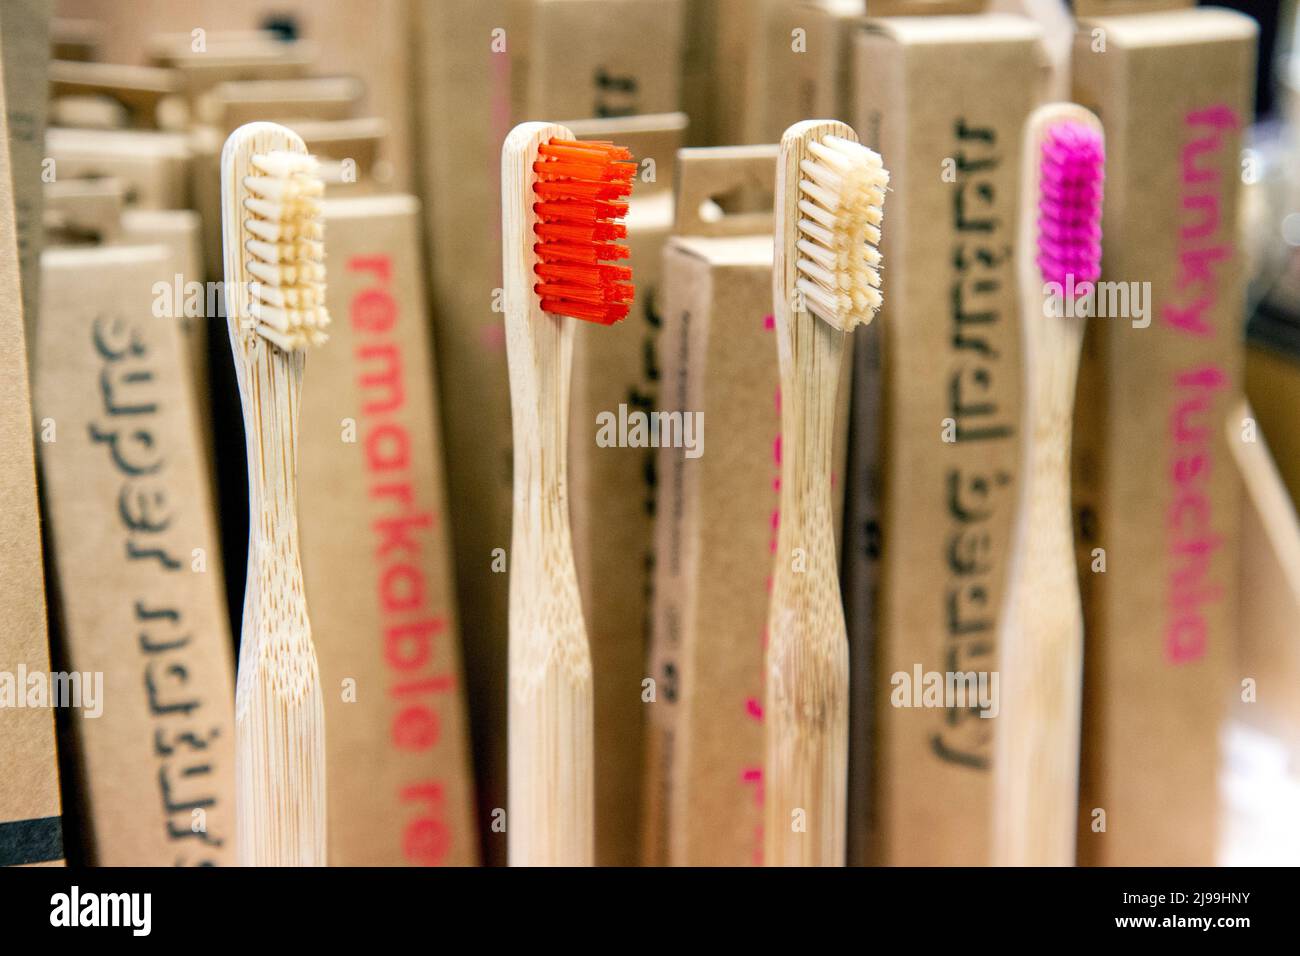 Bamboo toothbrushes at a shop Stock Photo